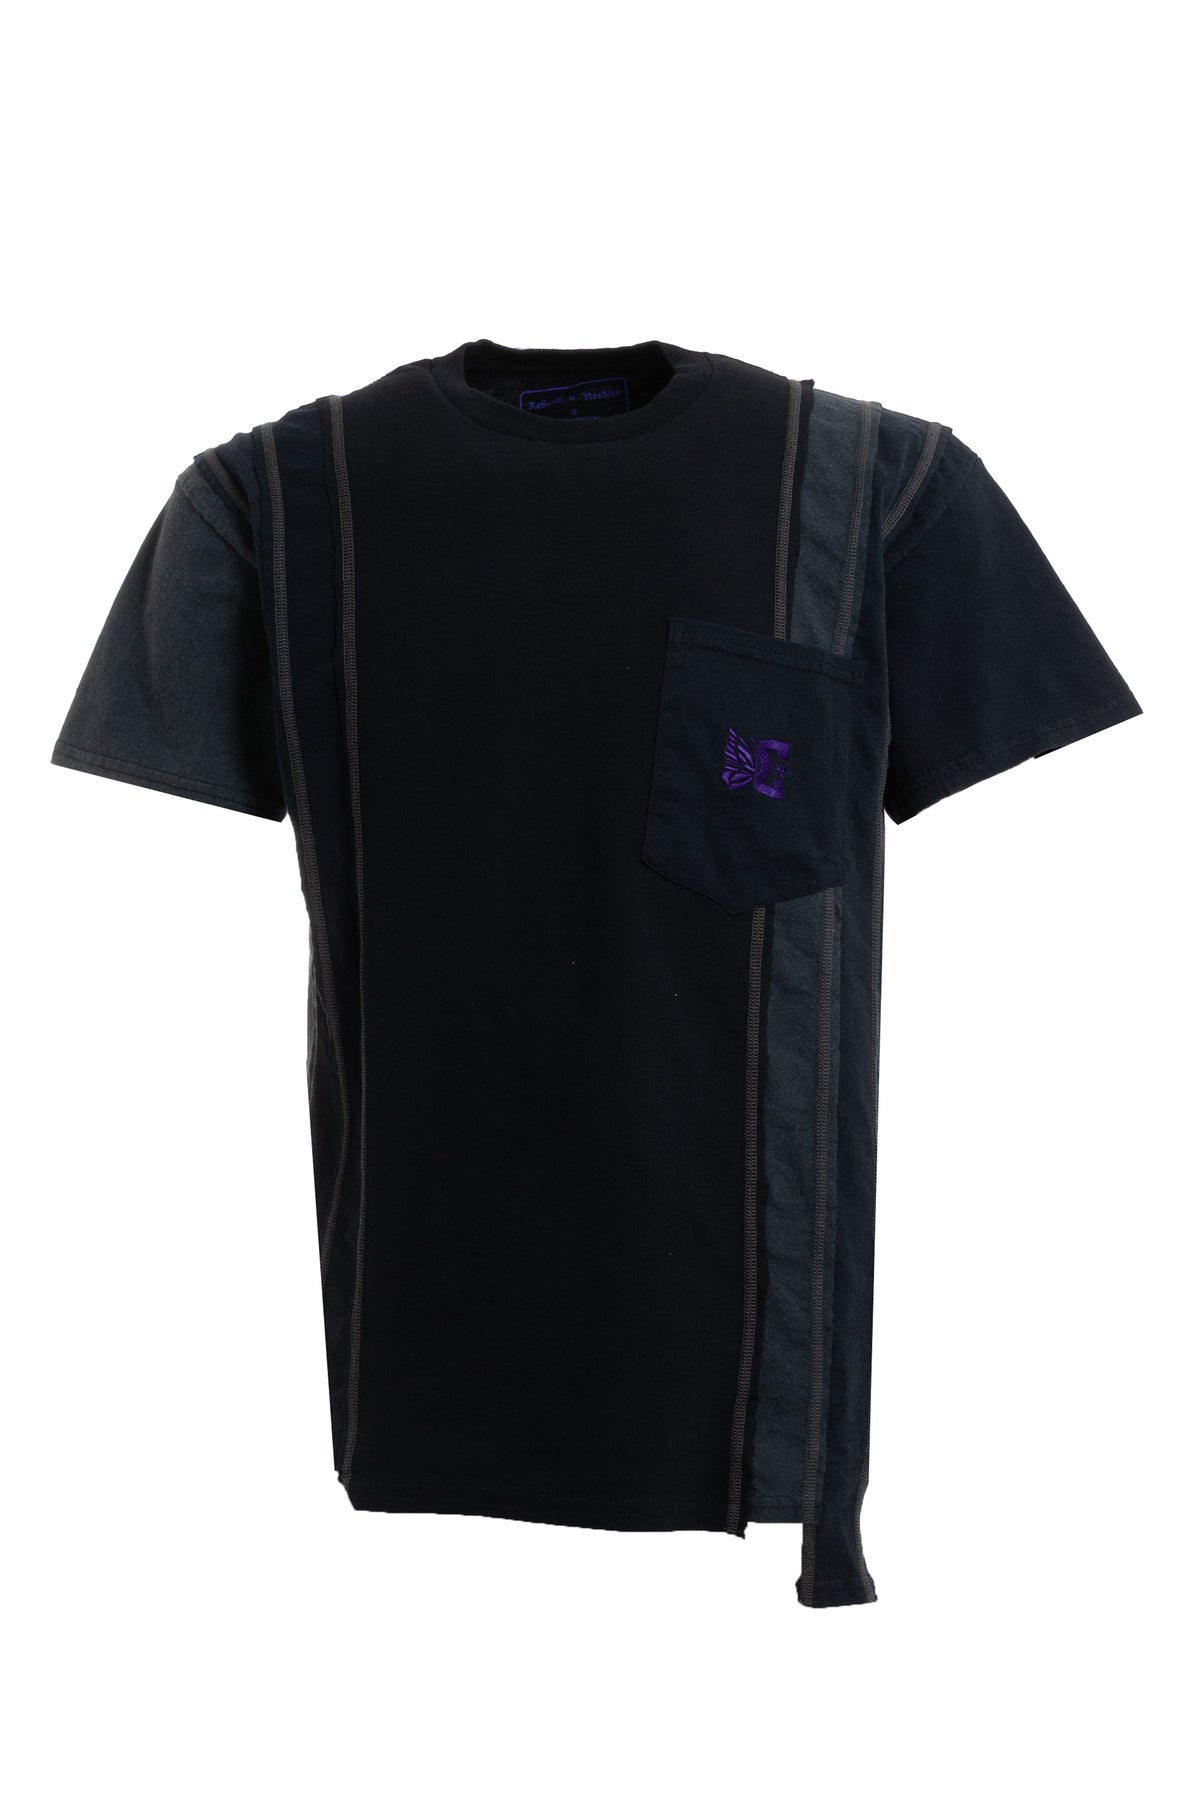 7 CUTS S/S TEE - SOLID / FADE / BLK / S